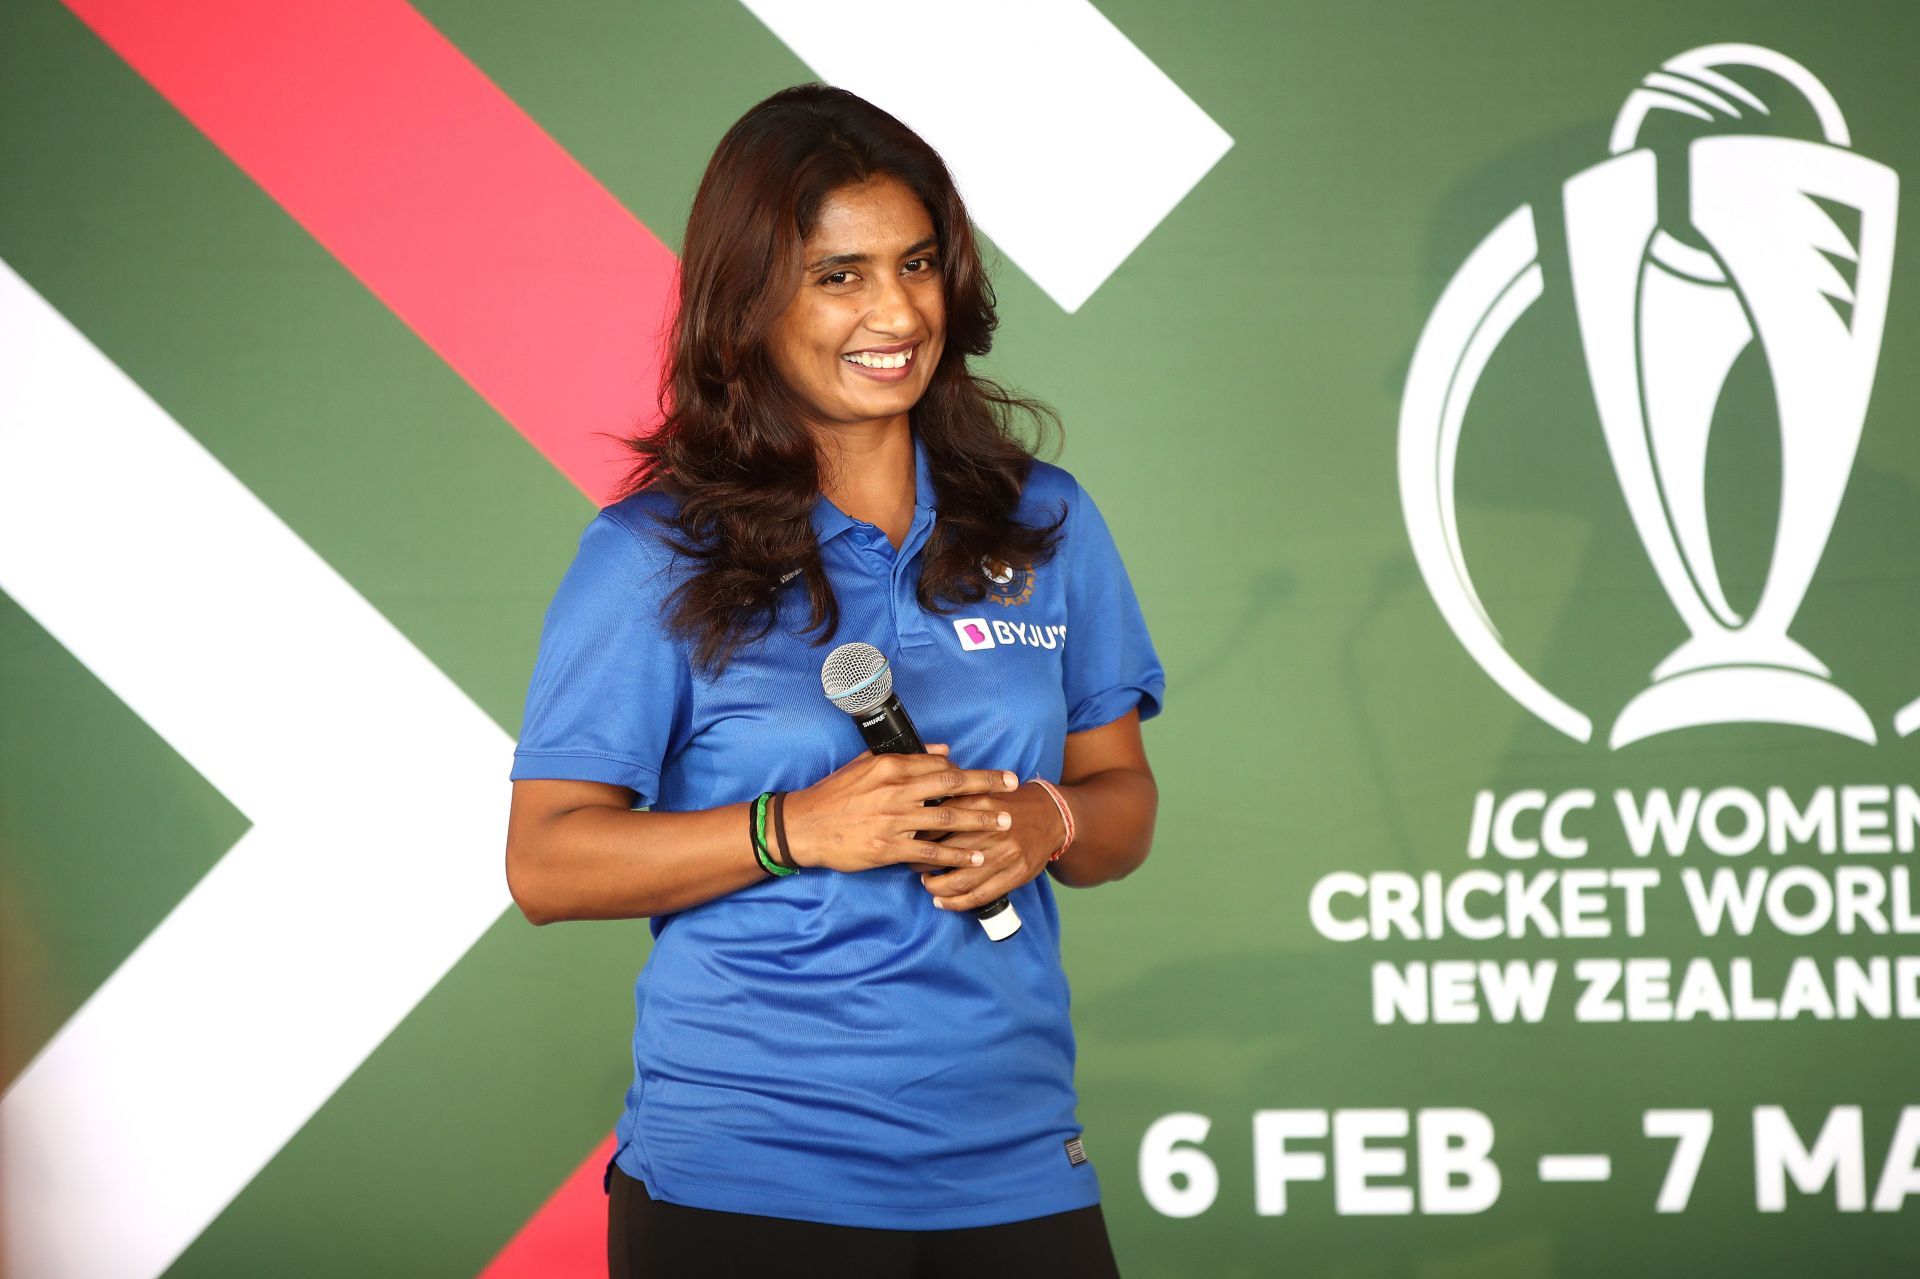 Mithali Raj asserted that her team has had good preparation before the World Cup (Credit: Getty Images)